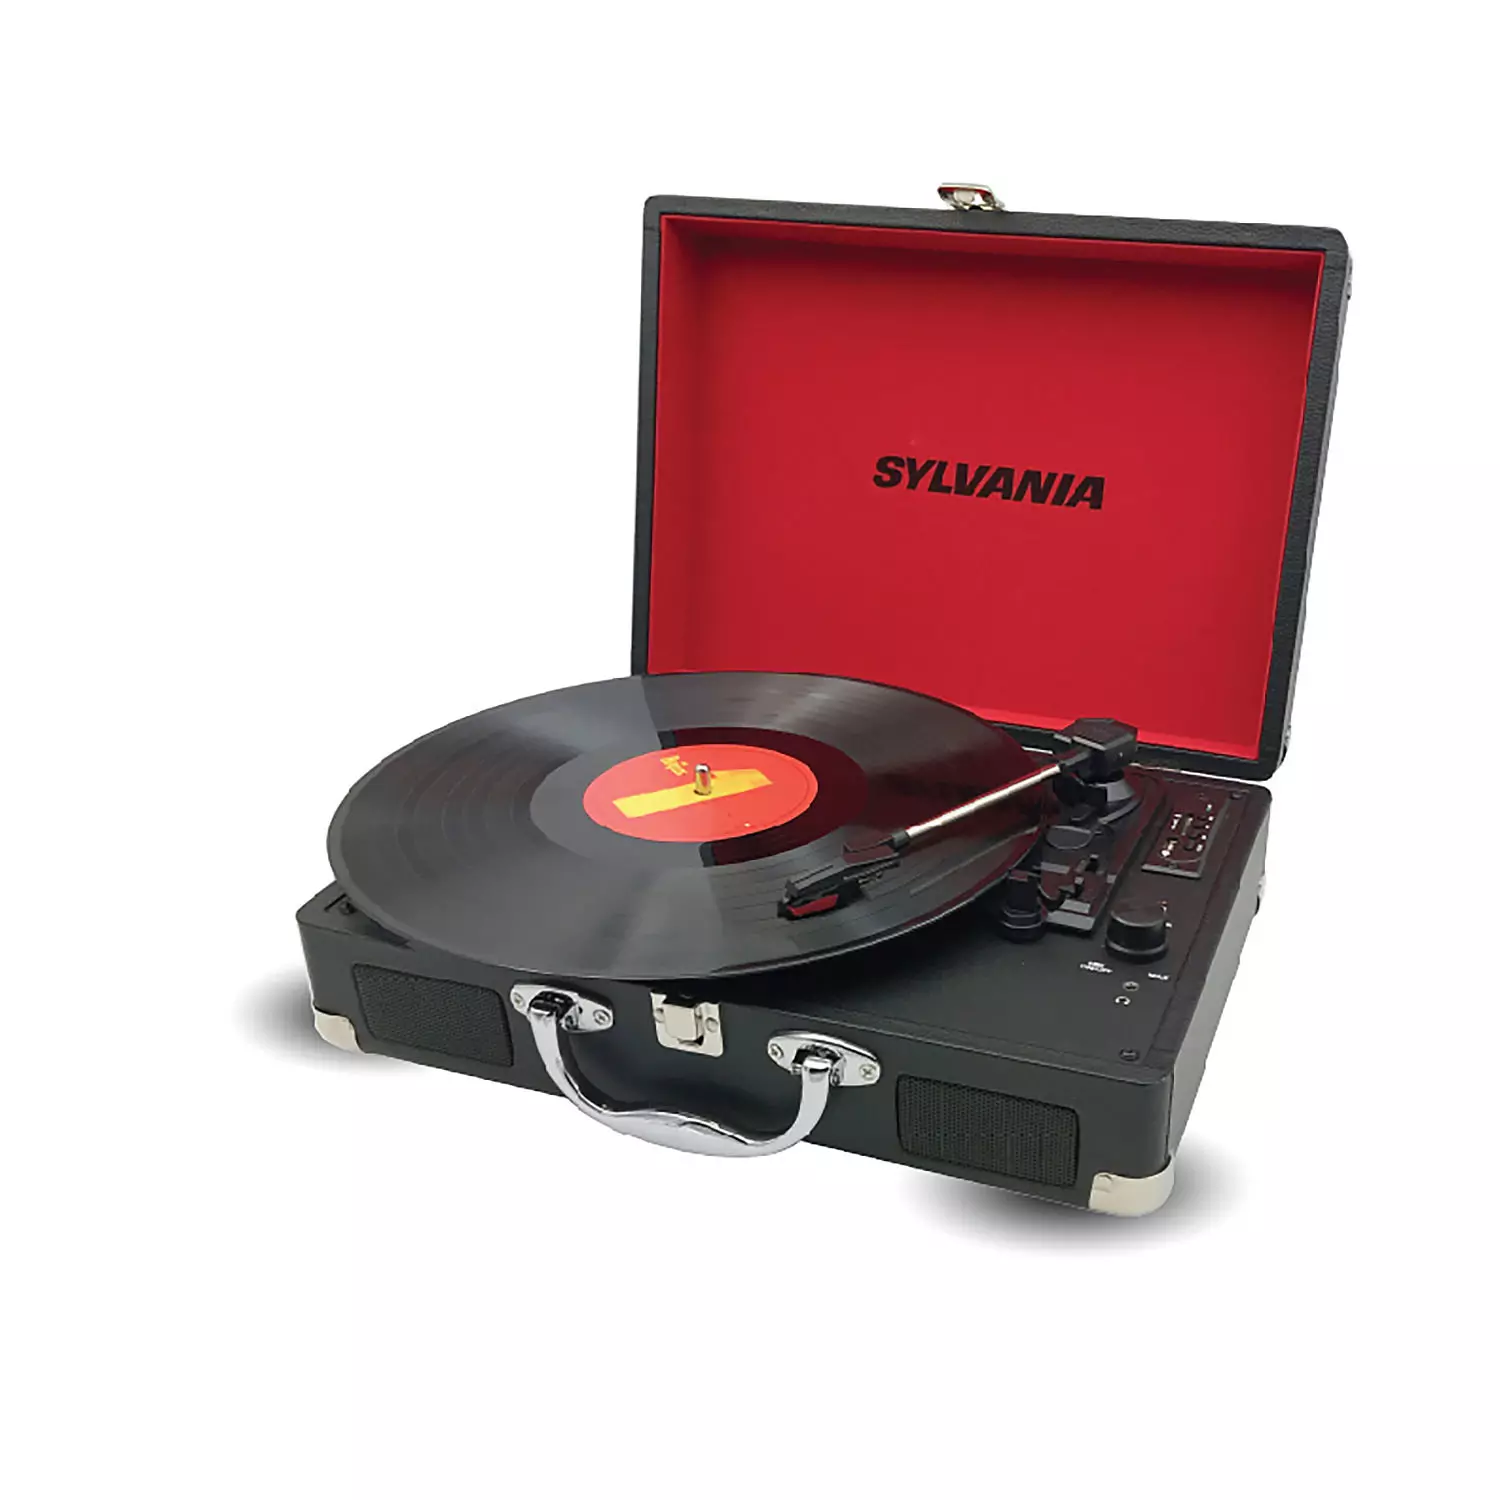 Sylvania - Belt drive USB turntable with case